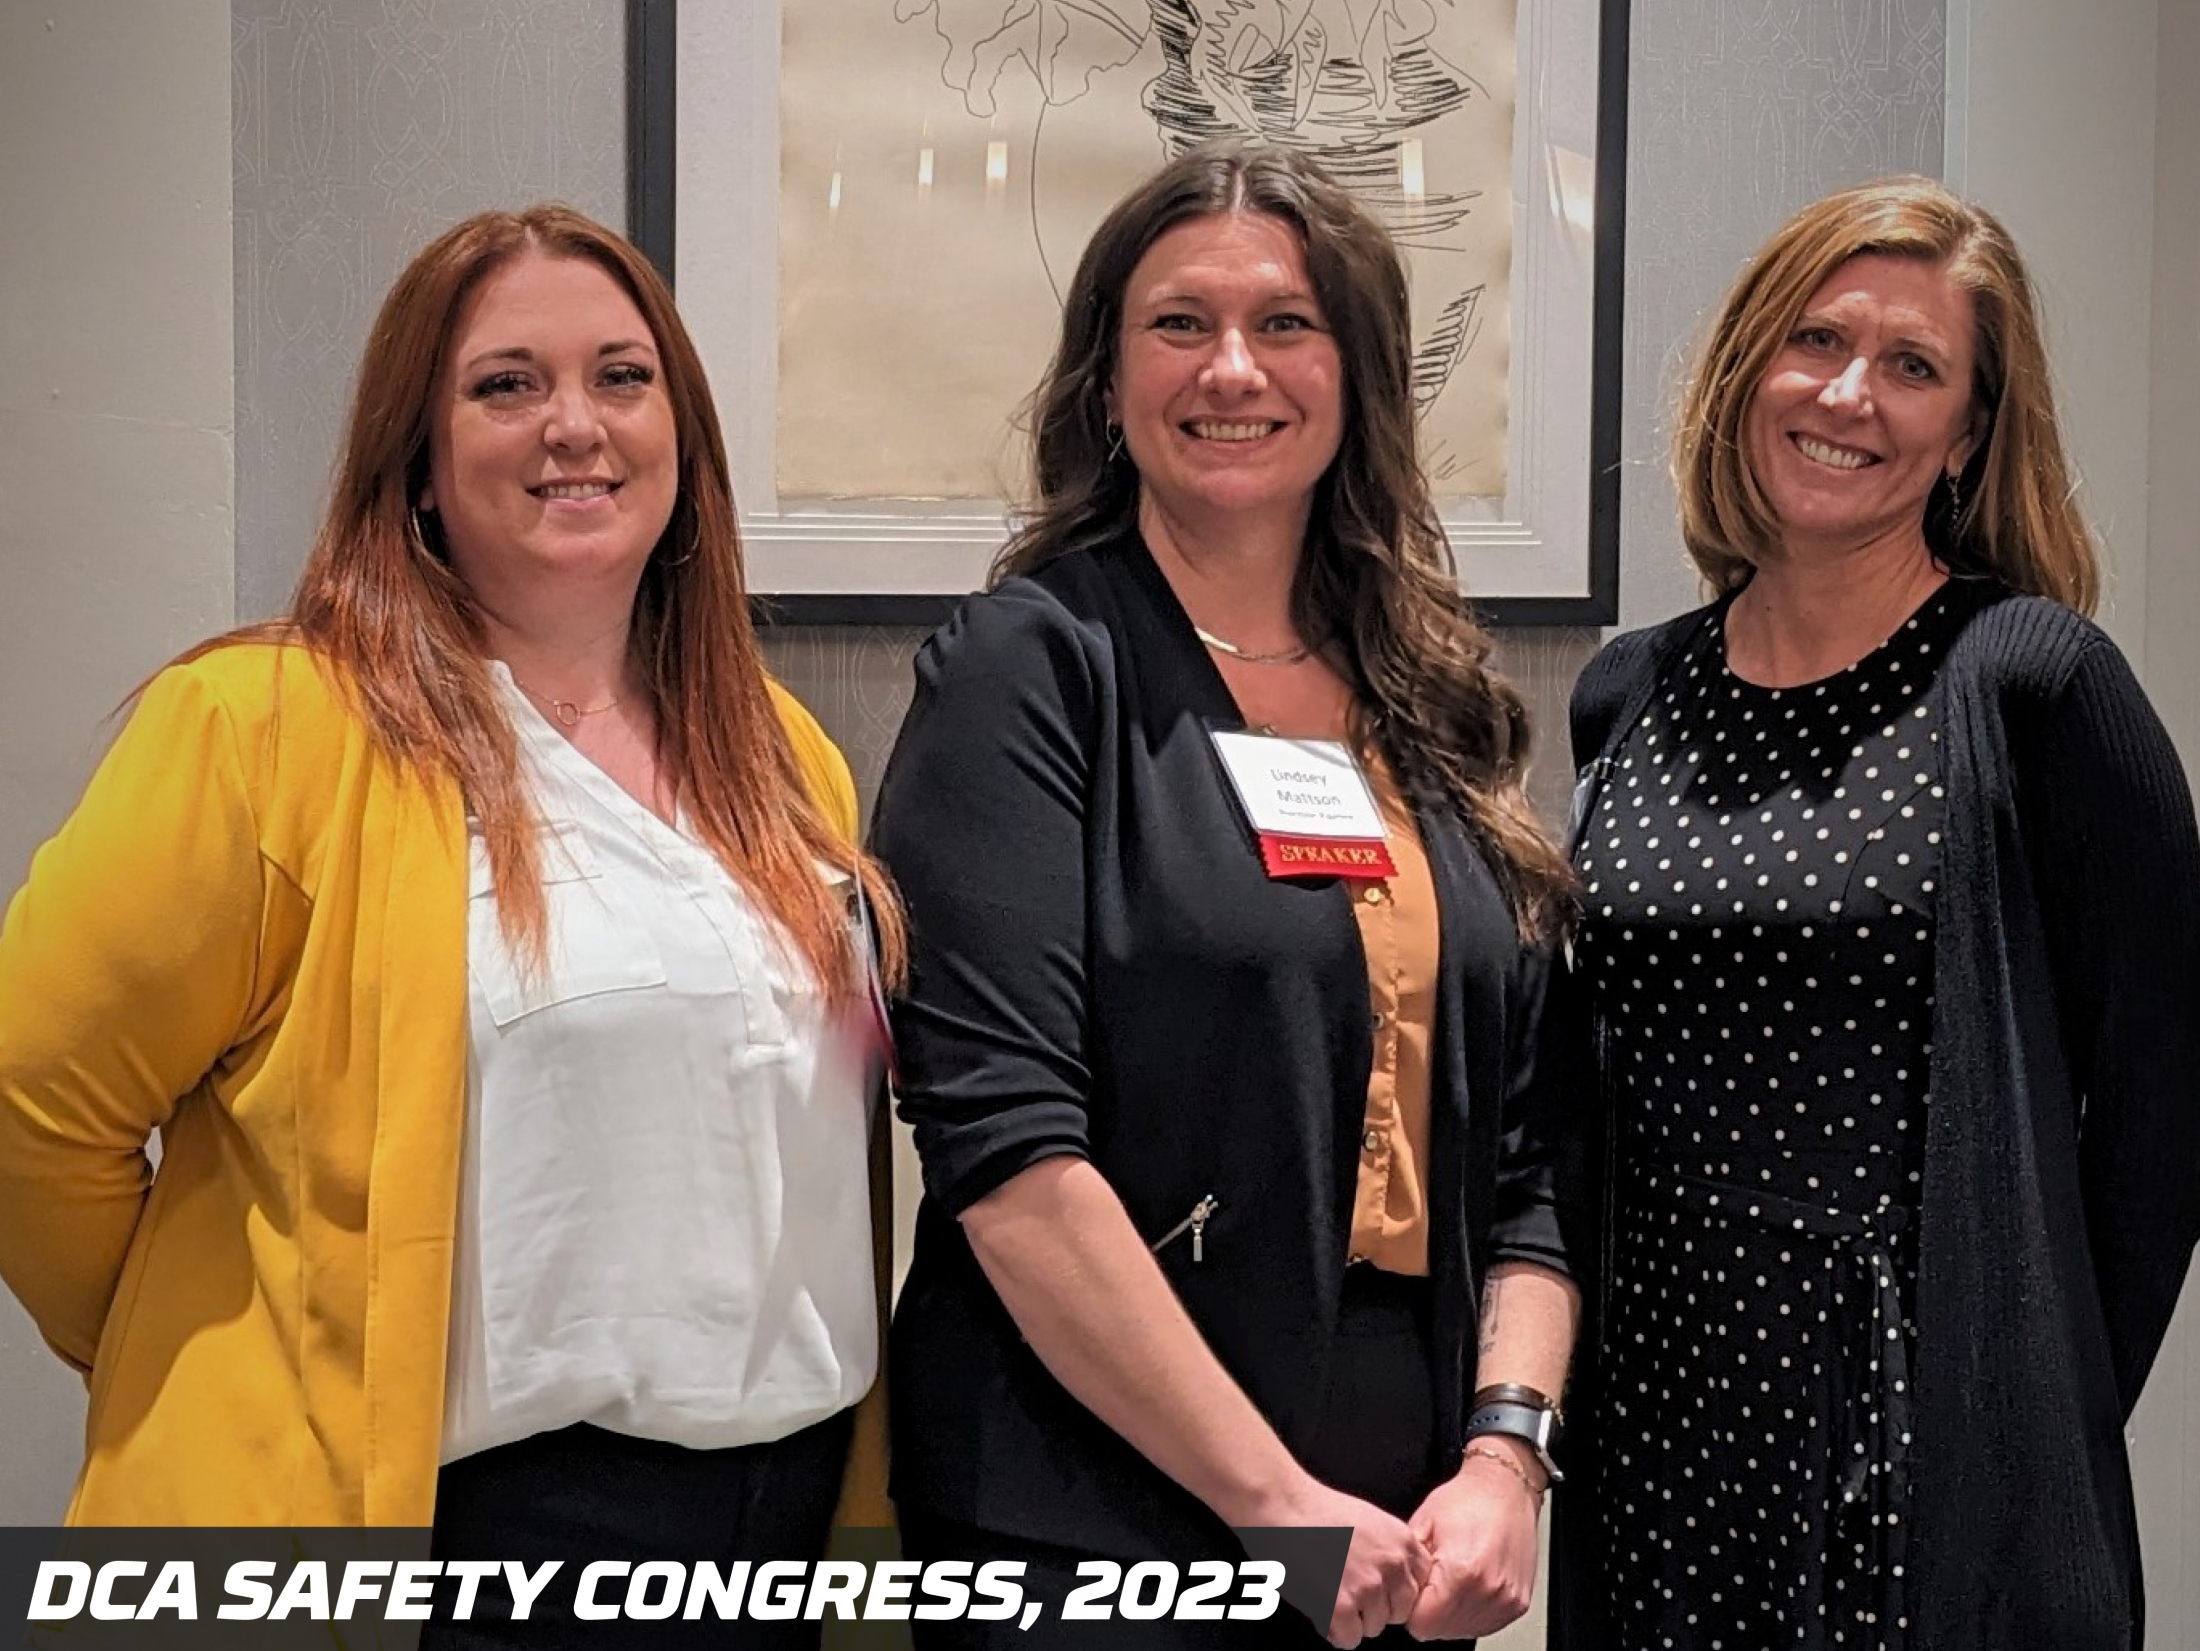 Precision Pipeline Human Trafficking Awareness Program: Presents at DCA Safety Congress, 2023